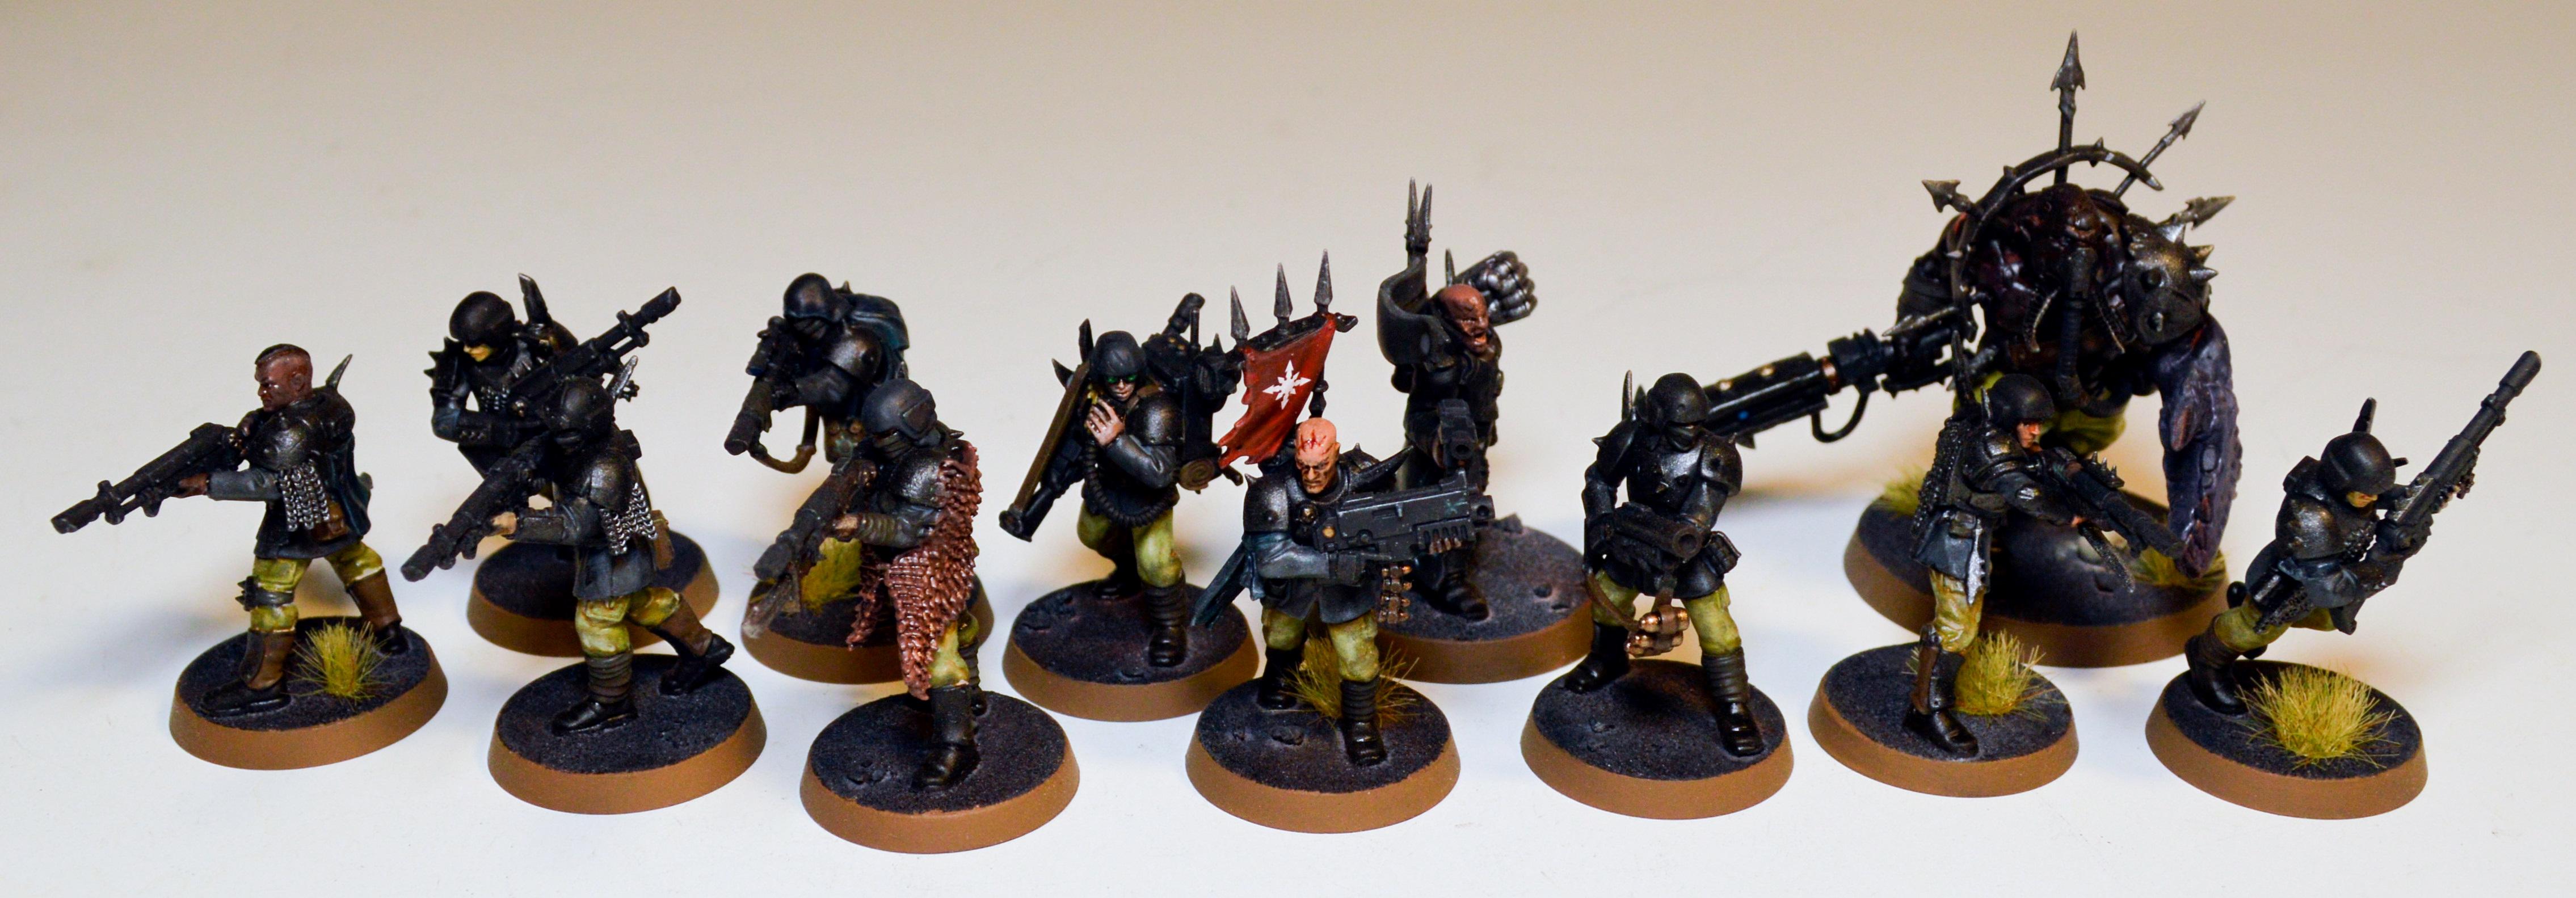 Black Legion, Blooded, Chaos, Chaos Space Marines